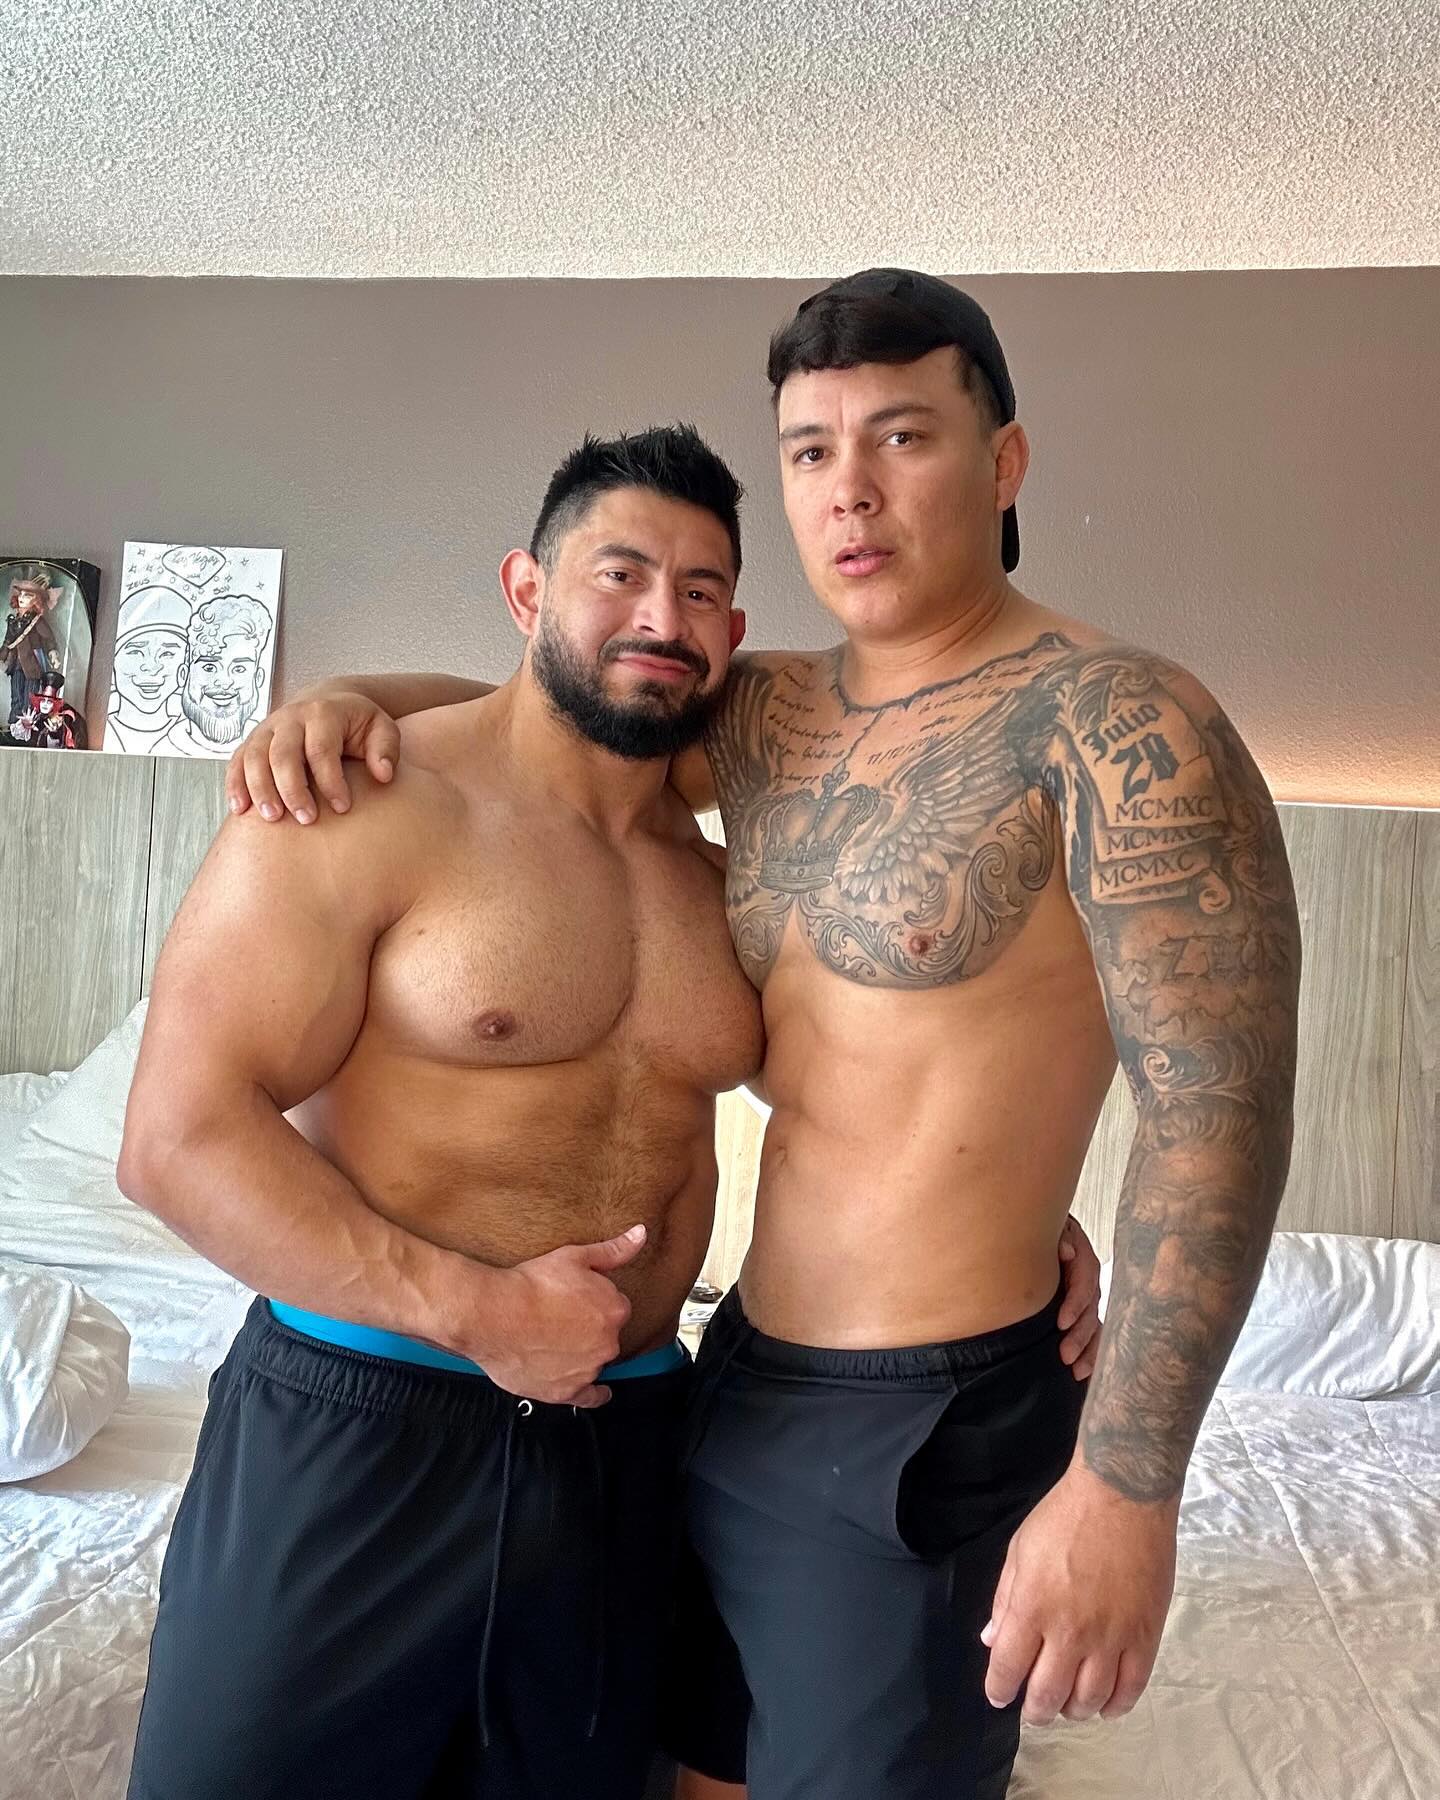 Just wrapped up filming a 🎥 with this hot Venezuelan hunk! 🇻🇪 Go give this ALPHA a follow! @zeus.rodriguezreal